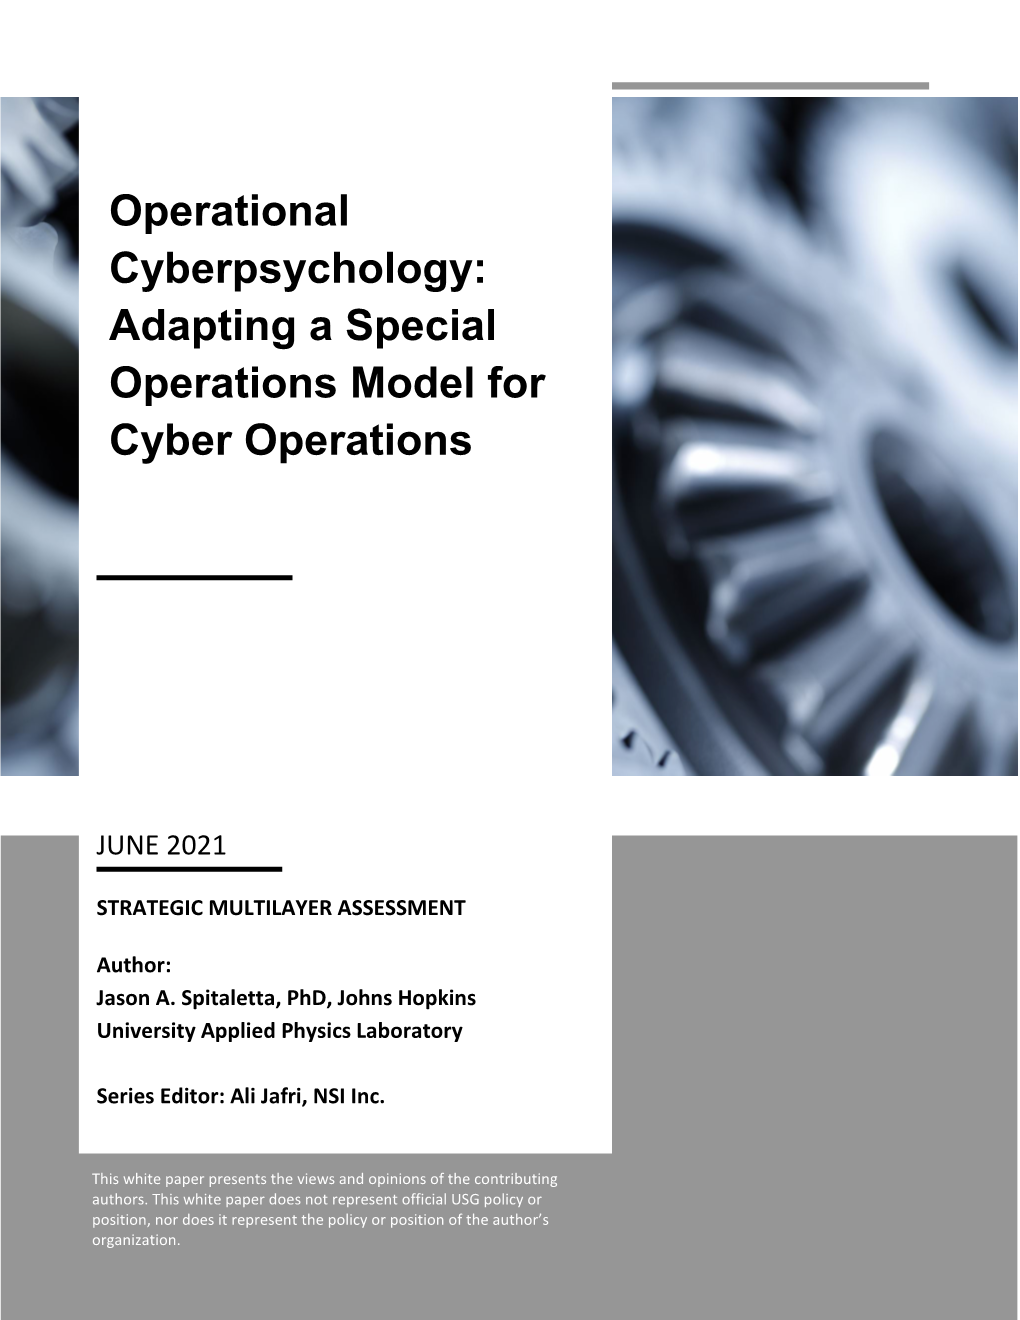 Operational Cyberpsychology: Adapting a Special Operations Model for Cyber Operations